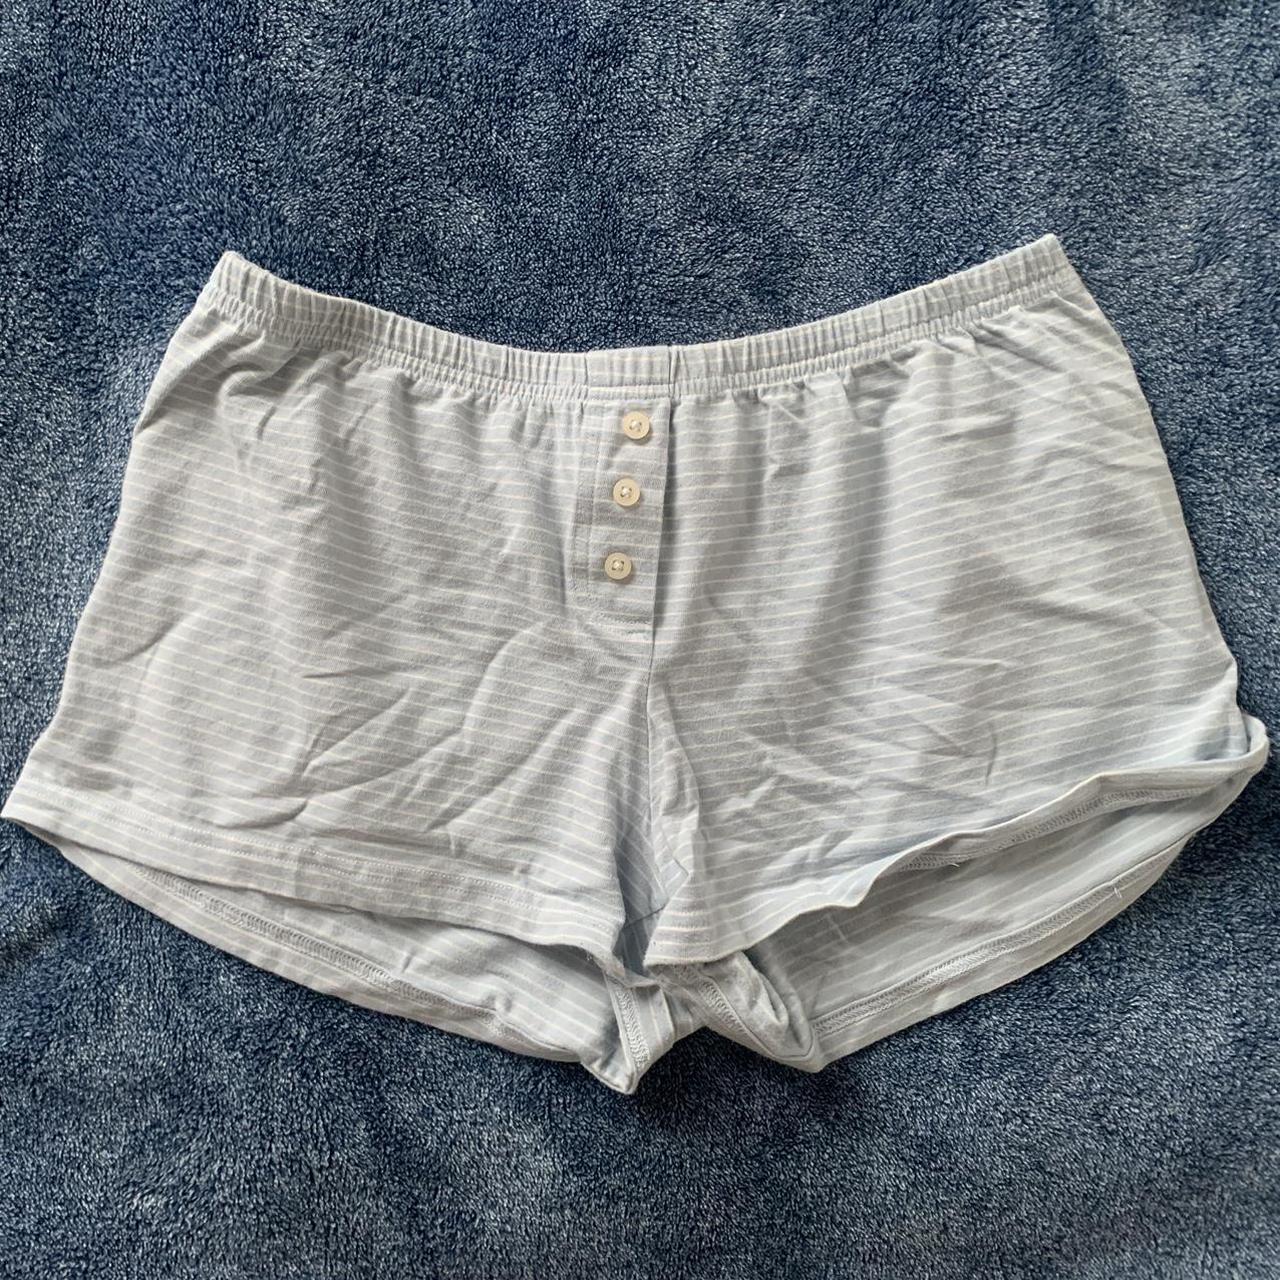 Keira Stripe Shorts from Brandy Melville! Cute and i... - Depop